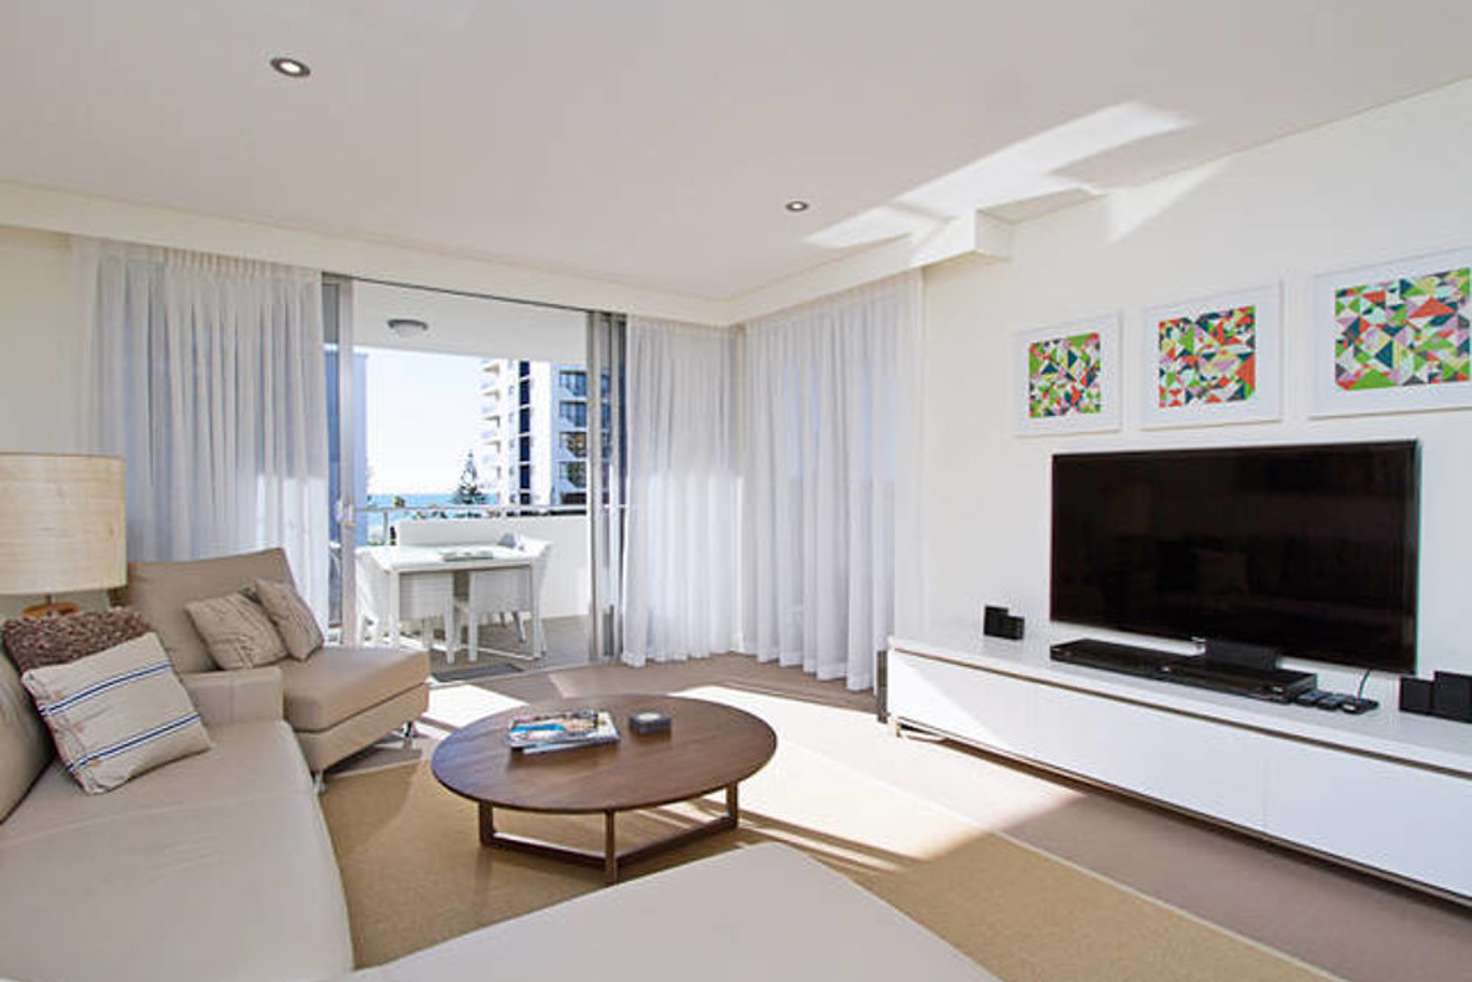 Main view of Homely apartment listing, 401/215 Boundary Street, Coolangatta QLD 4225